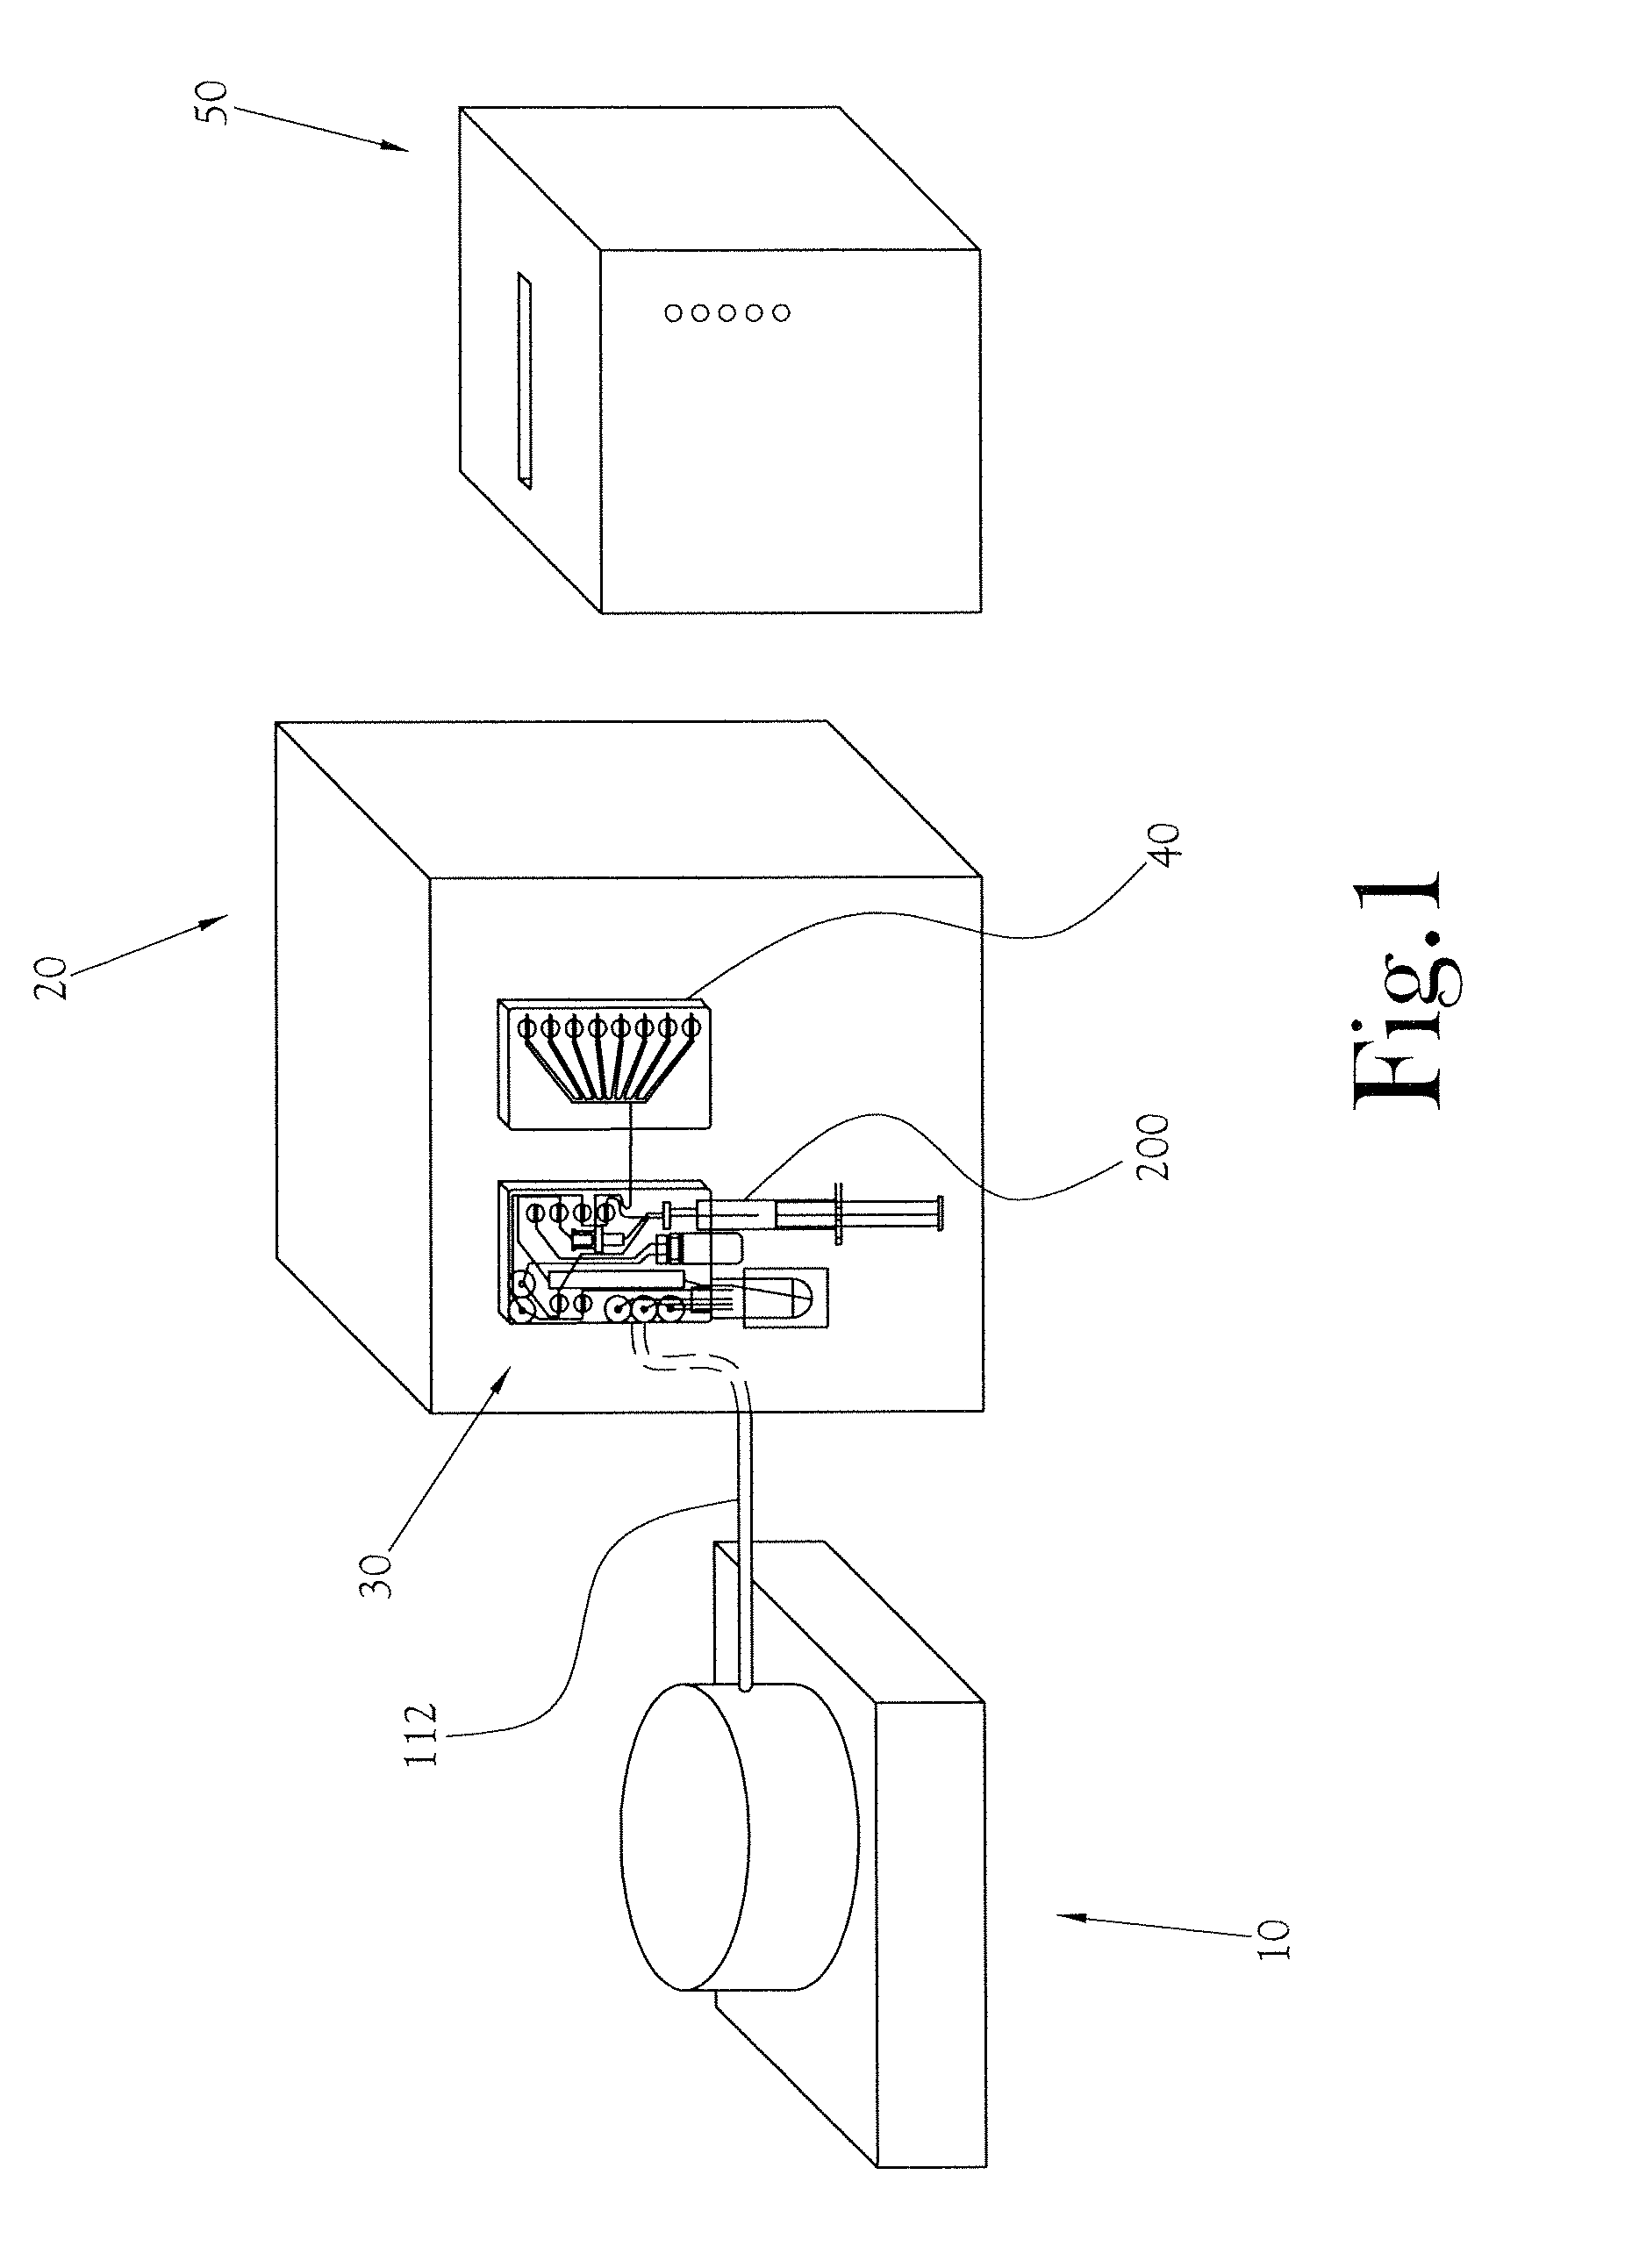 Dose synthesis module for biomarker generator system